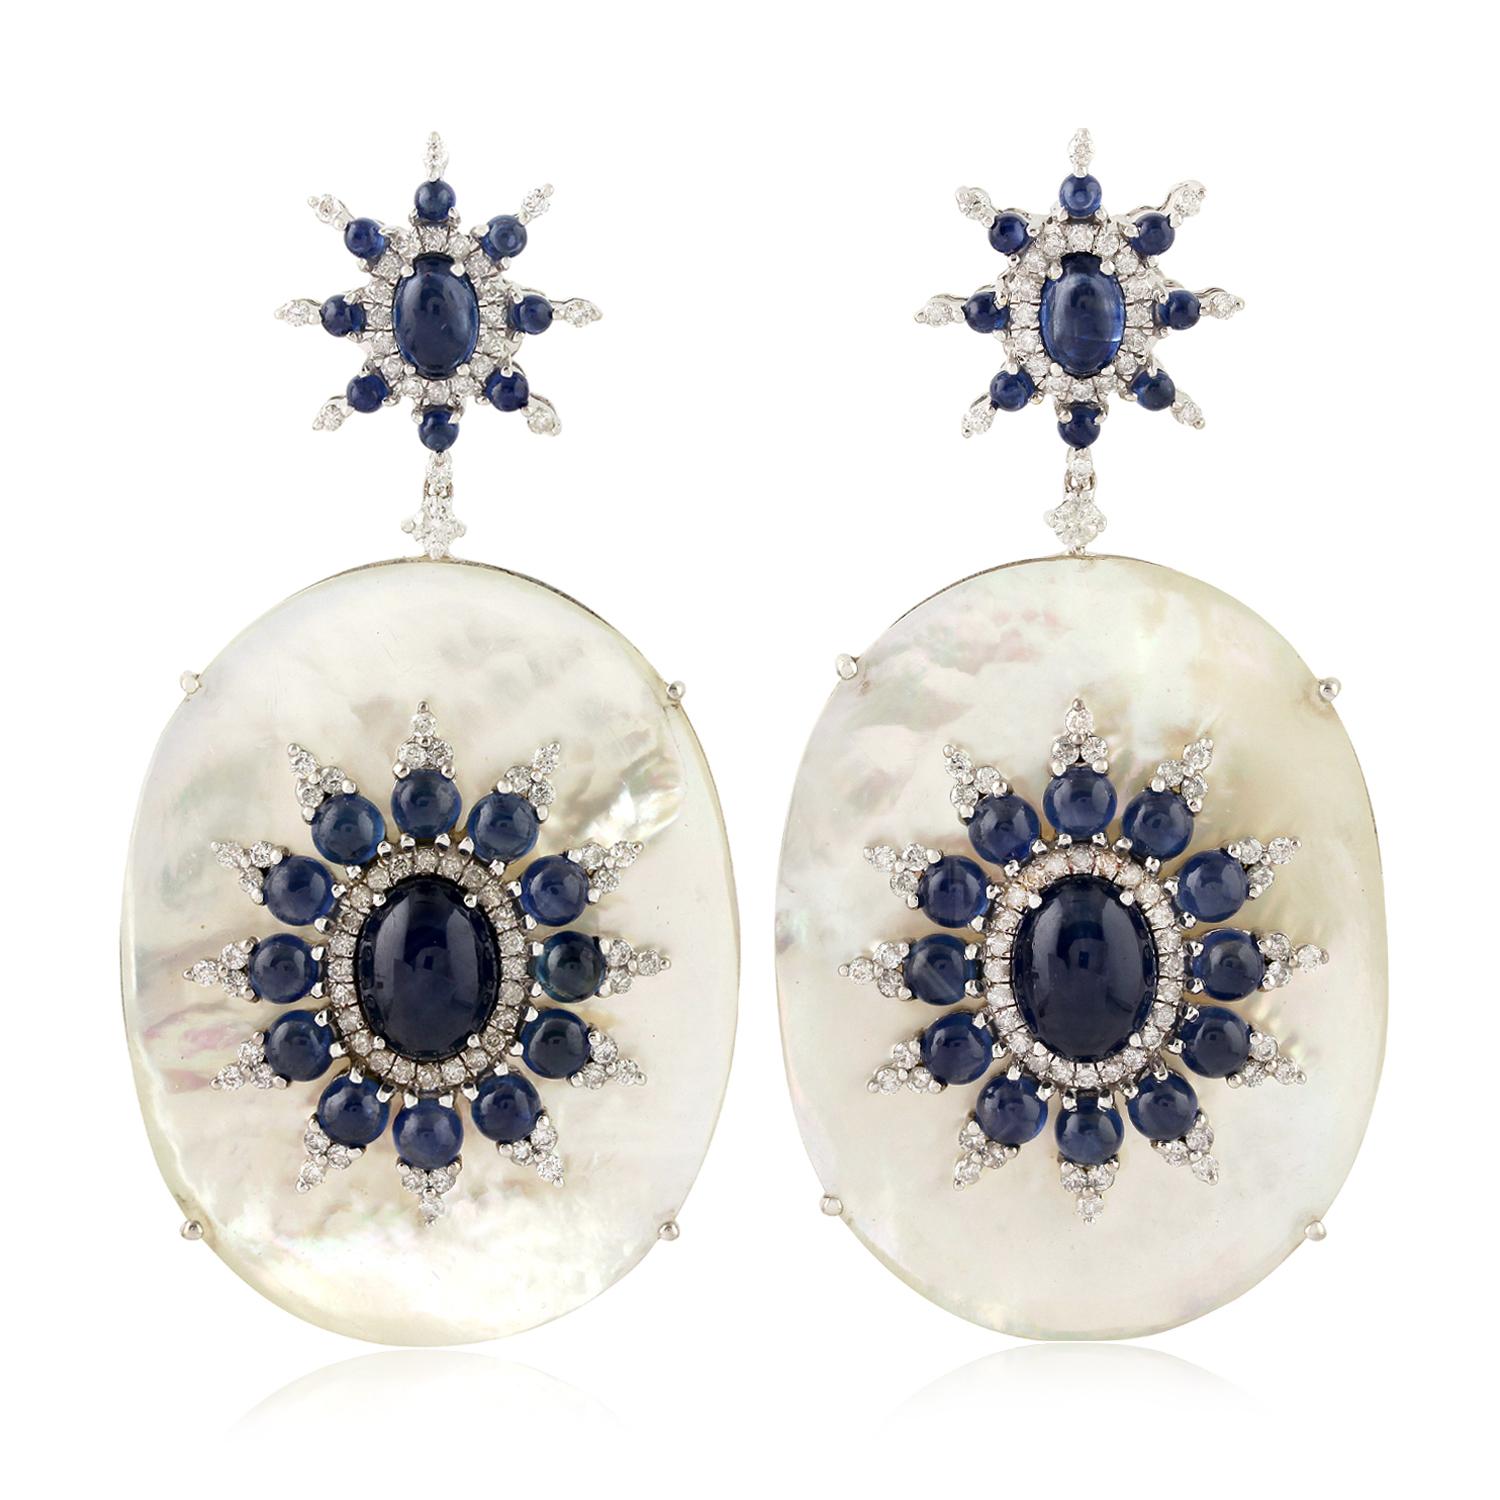 Contemporary 18k White Gold Diamond 13.92ct Sapphire 43.7ct Mother of Pearl Dangle Earrings